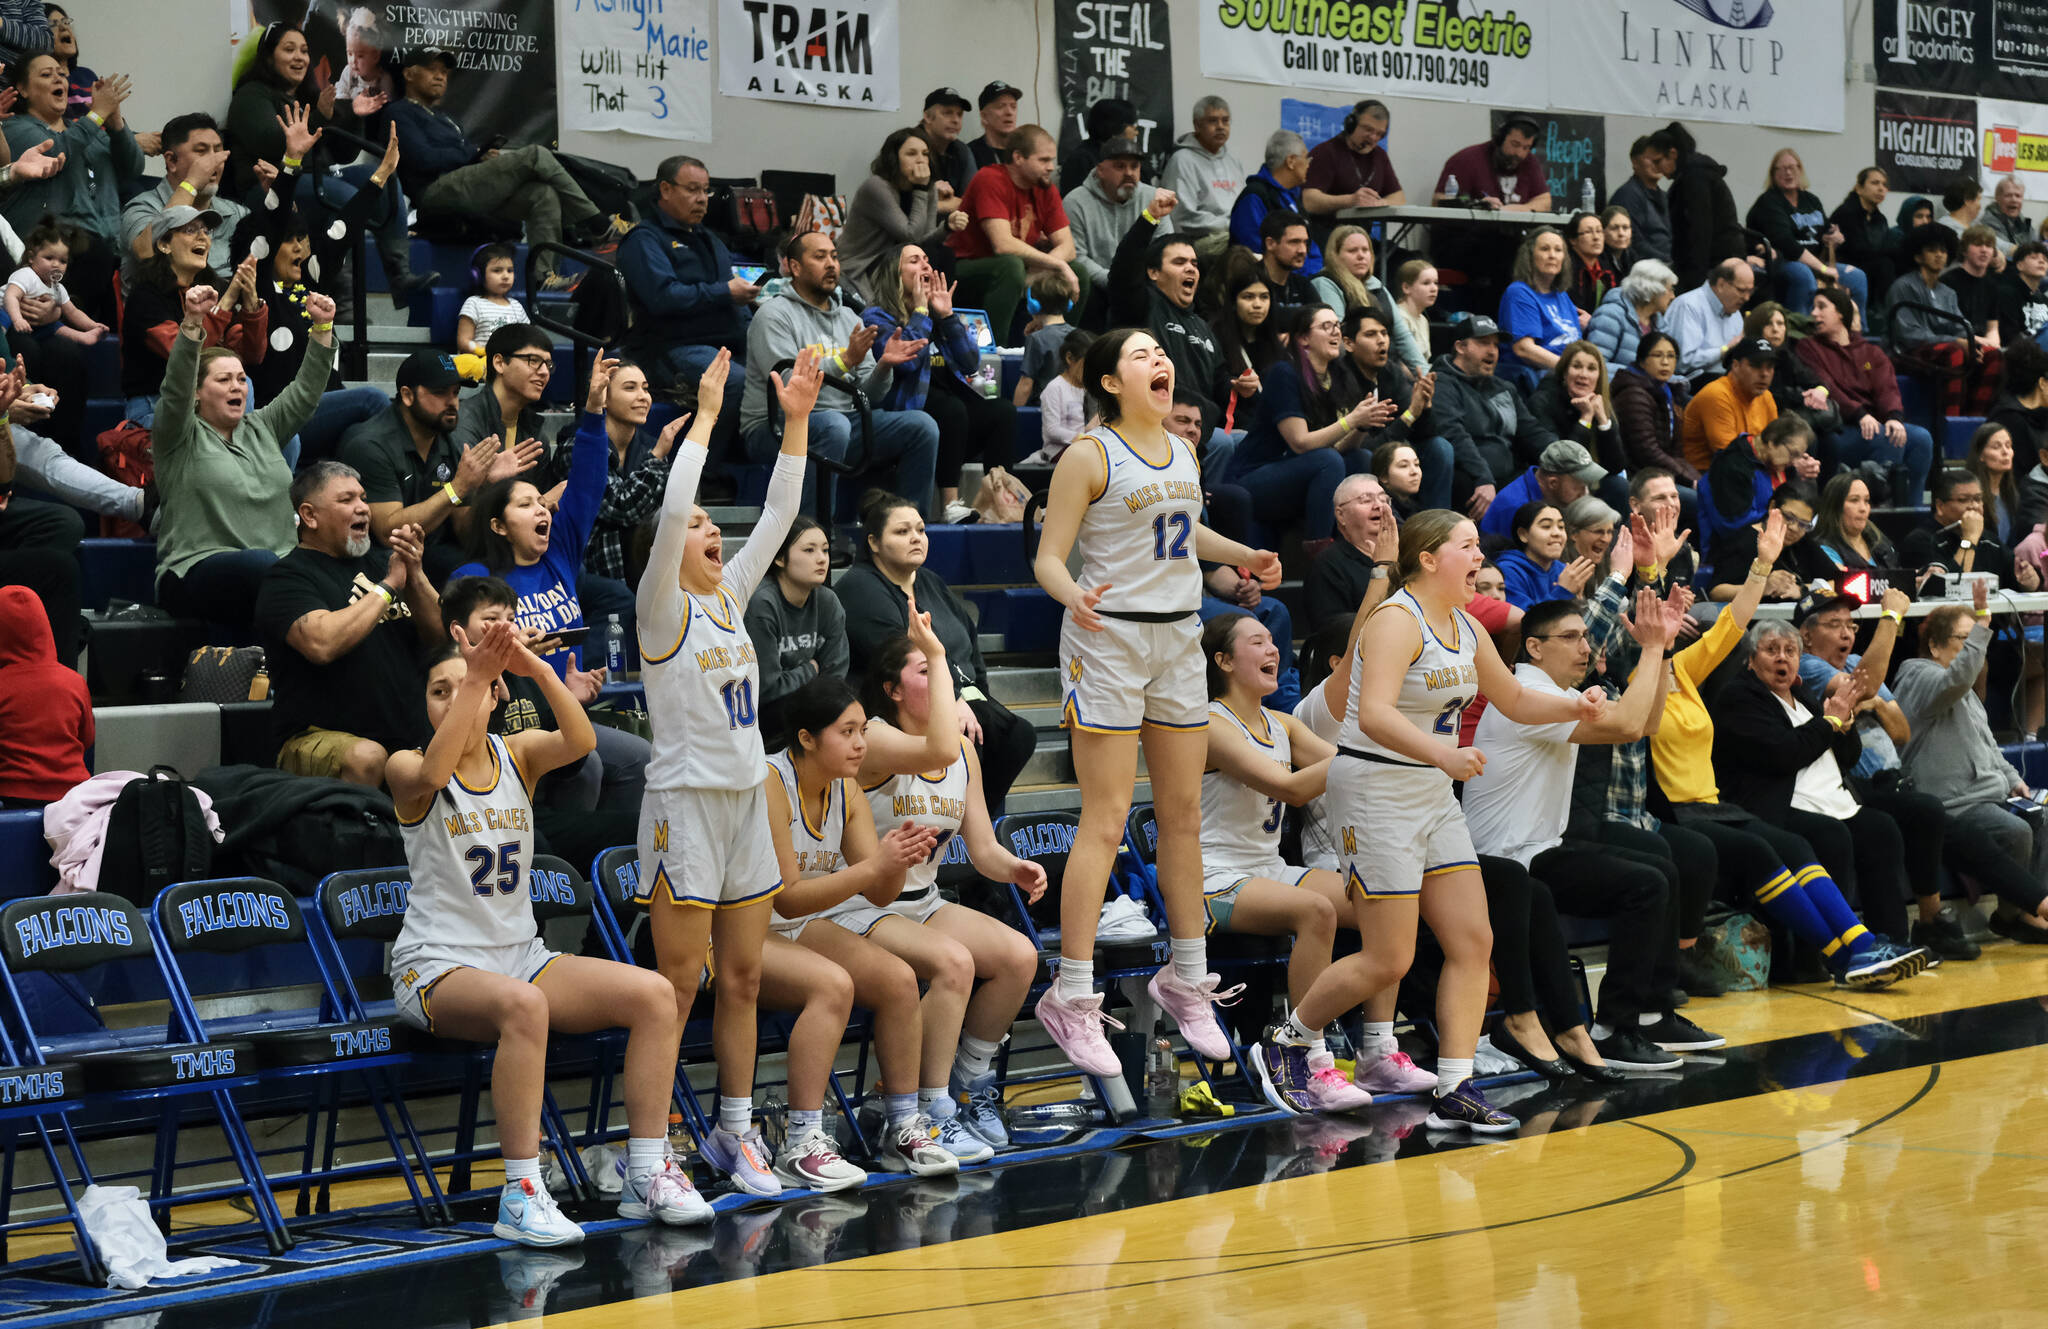 Metlakatla MisChiefs players celebrate a made basket during their 47-18 win over the Craig Lady Panthers in the 2A Region V Championship Game at Juneau’s Thunder Mountain High School on Friday. (Klas Stolpe / For the Juneau Empire)